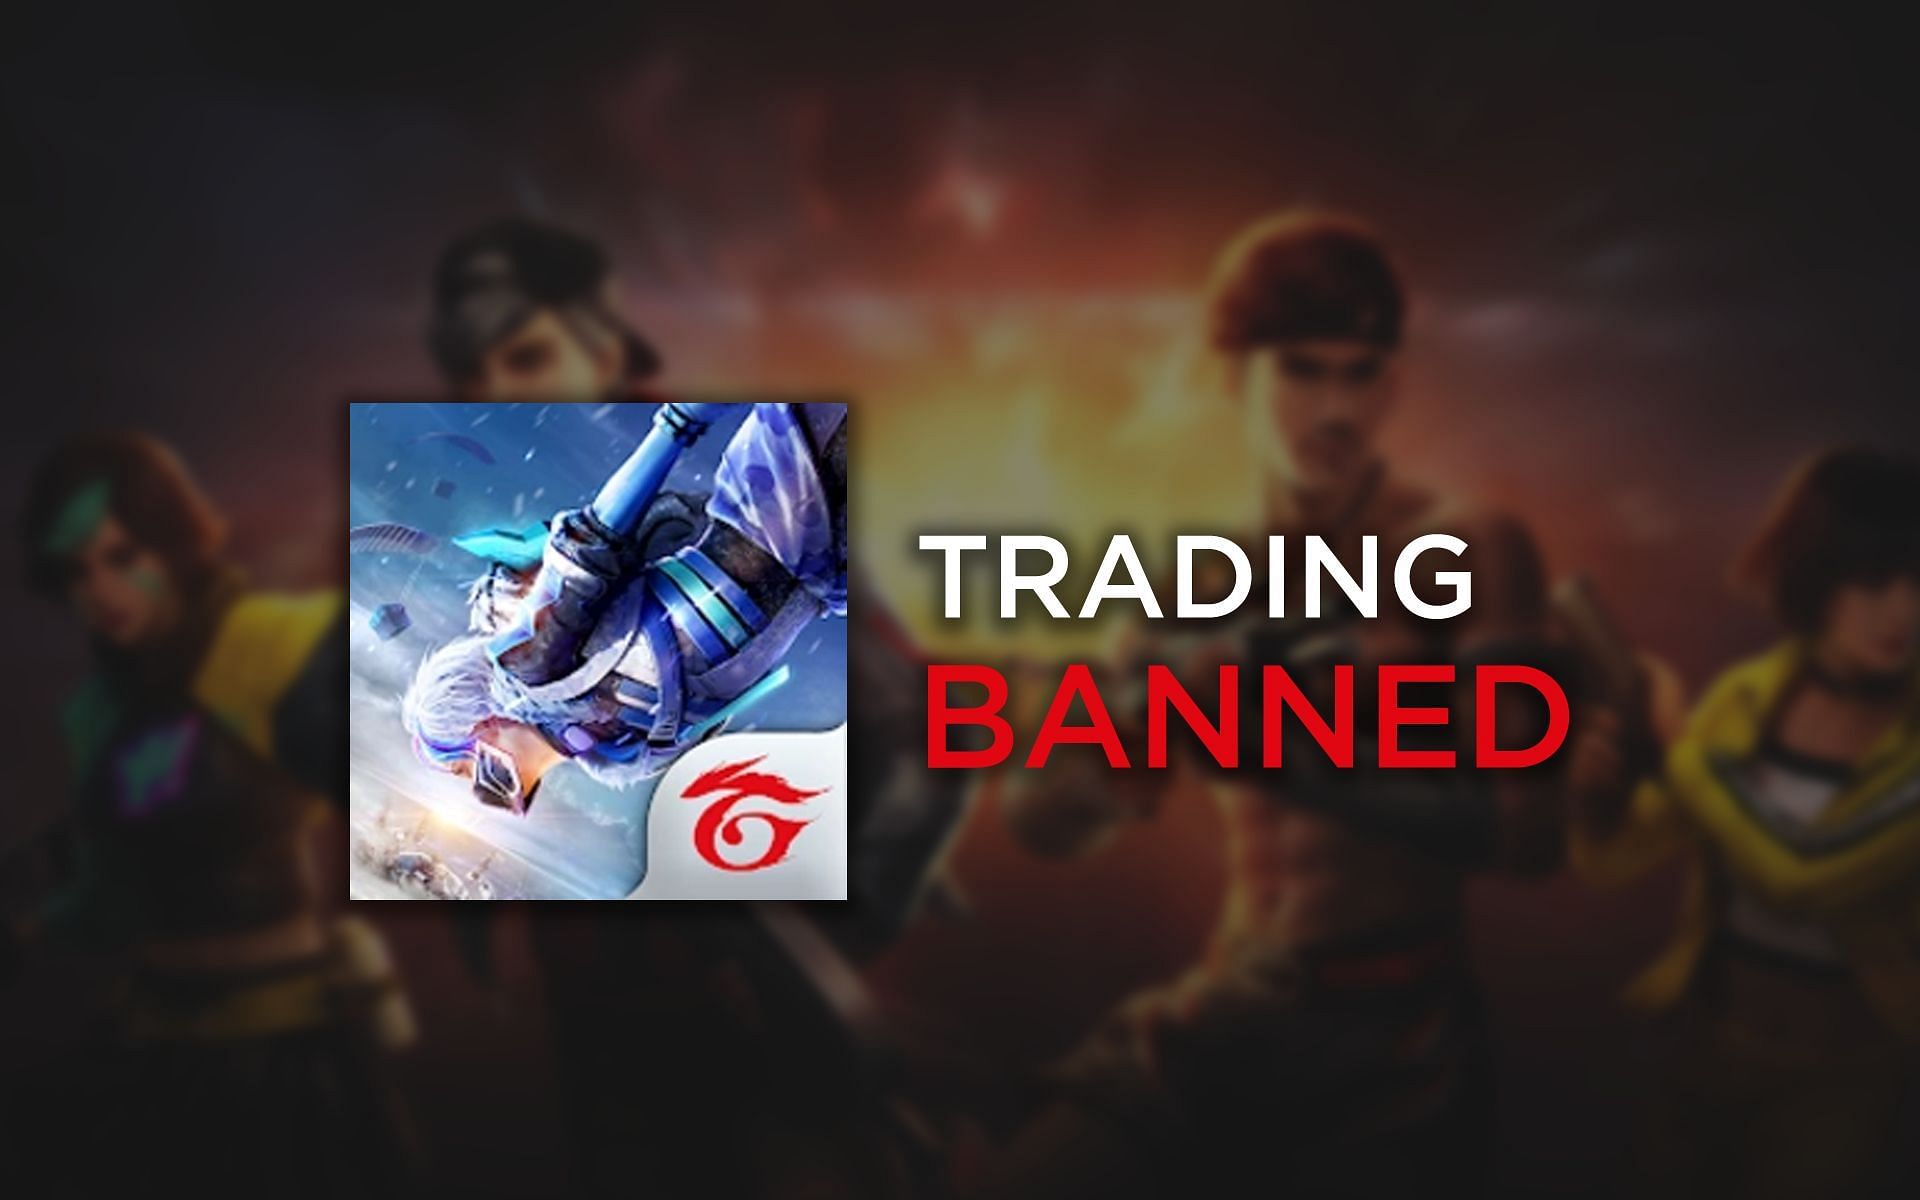 Buying and selling of accounts is not allowed as per the developers (Image via Garena)